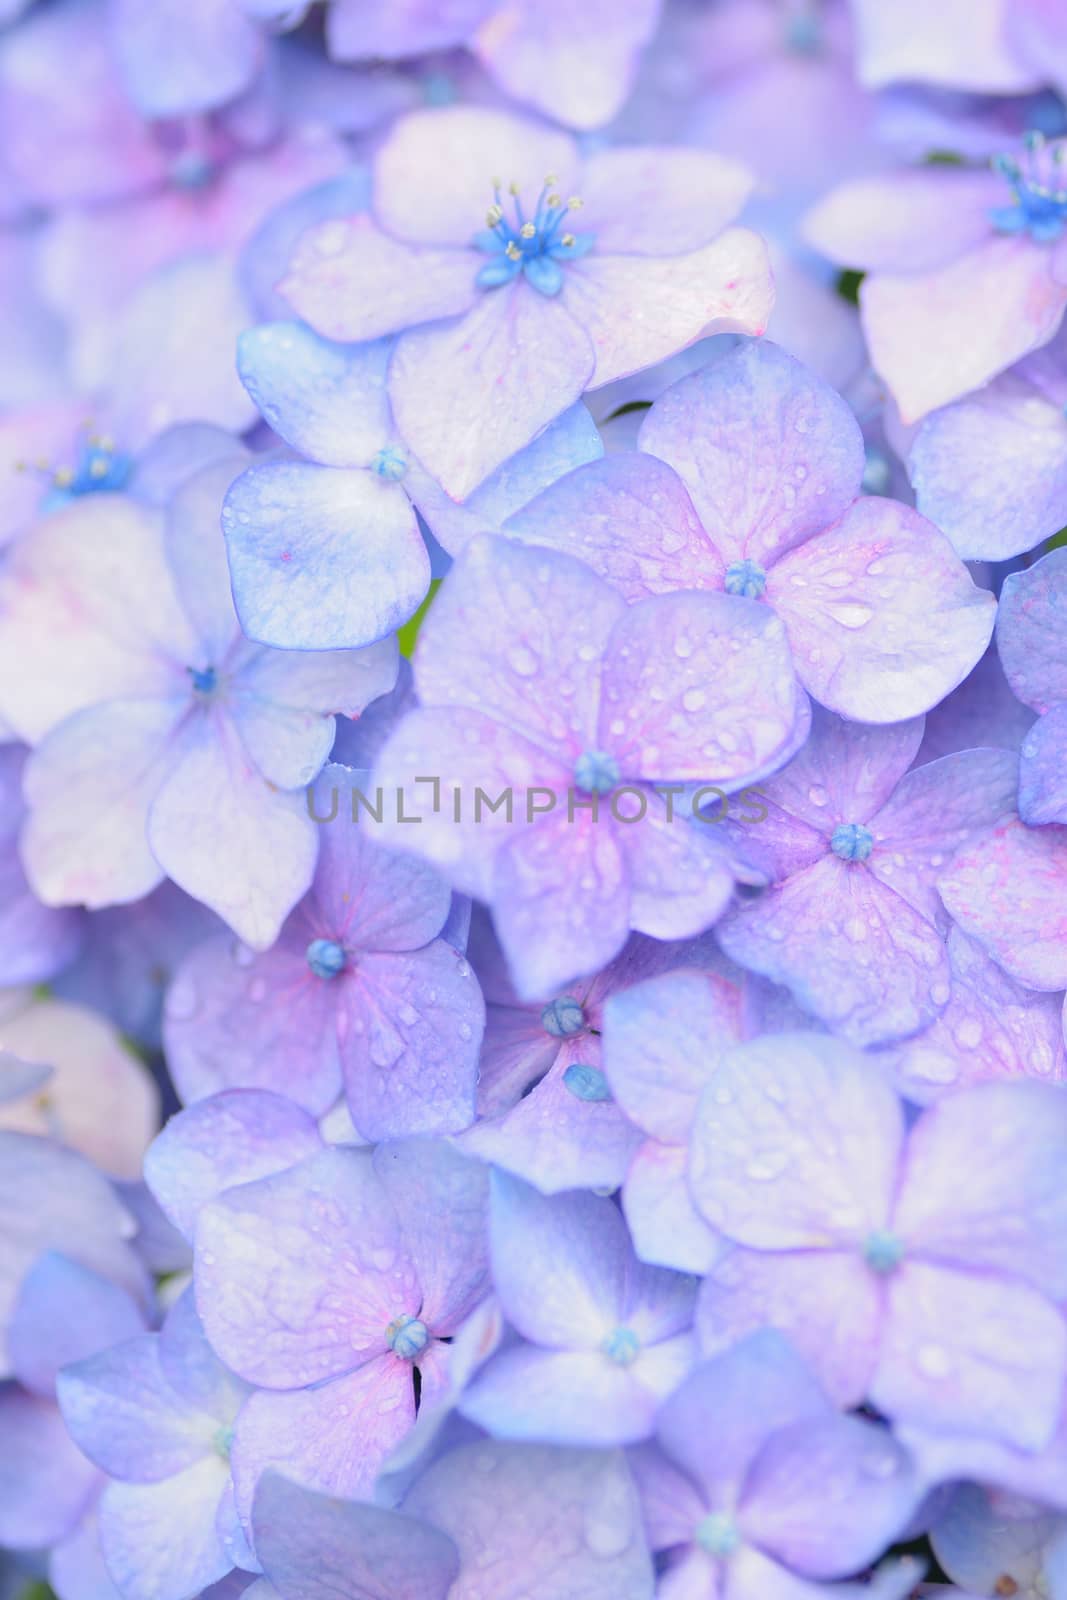 Macro texture of blue colored Hydrangea flowers with water droplets in vertical frame